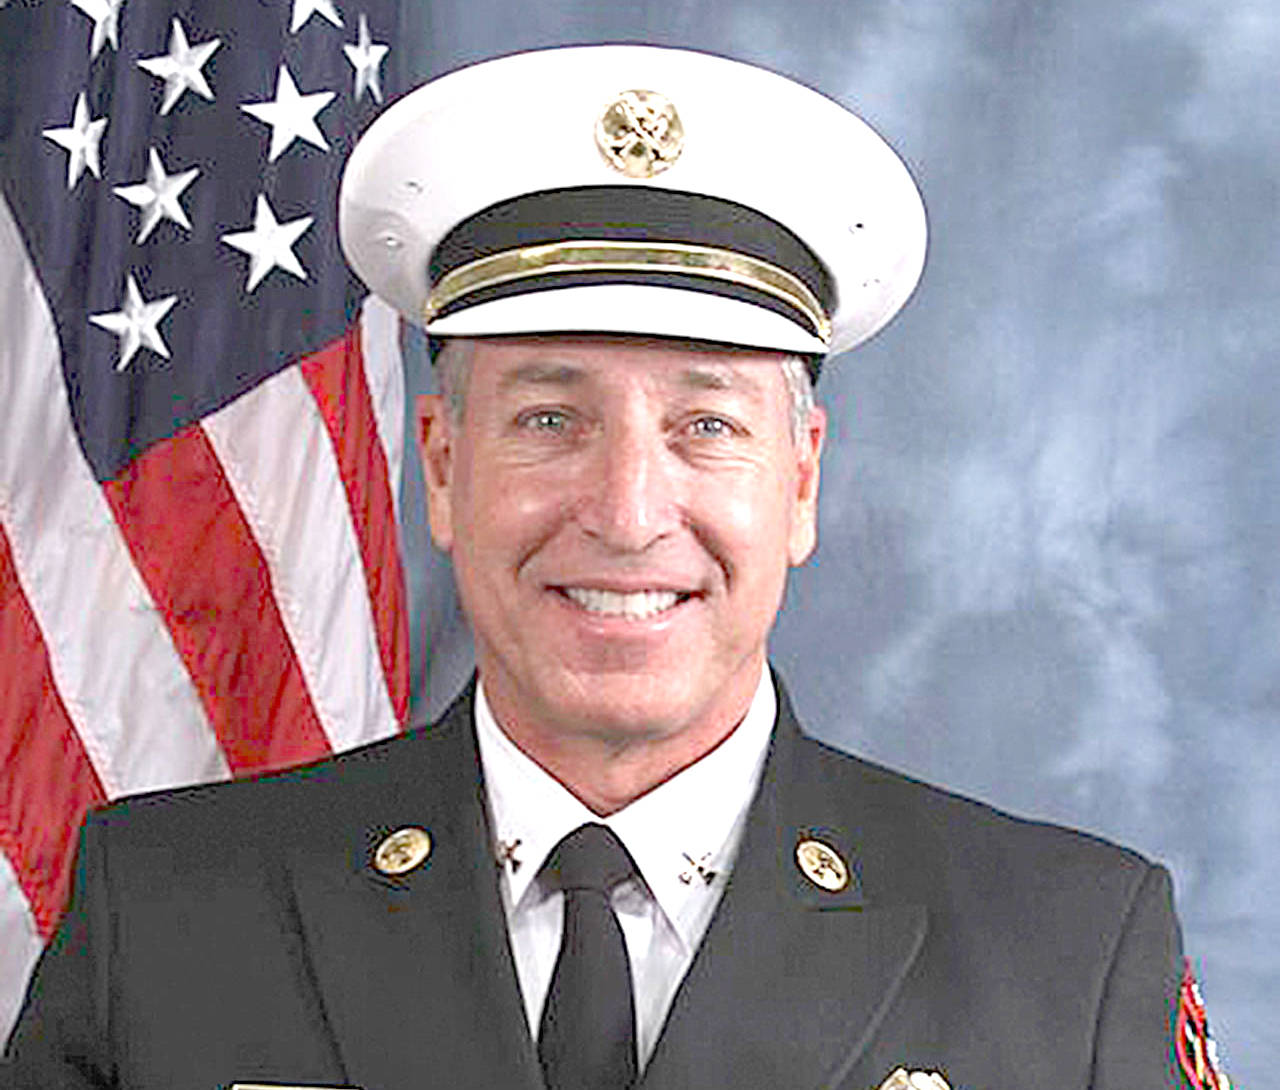 Bremerton terminates fire chief without explanation